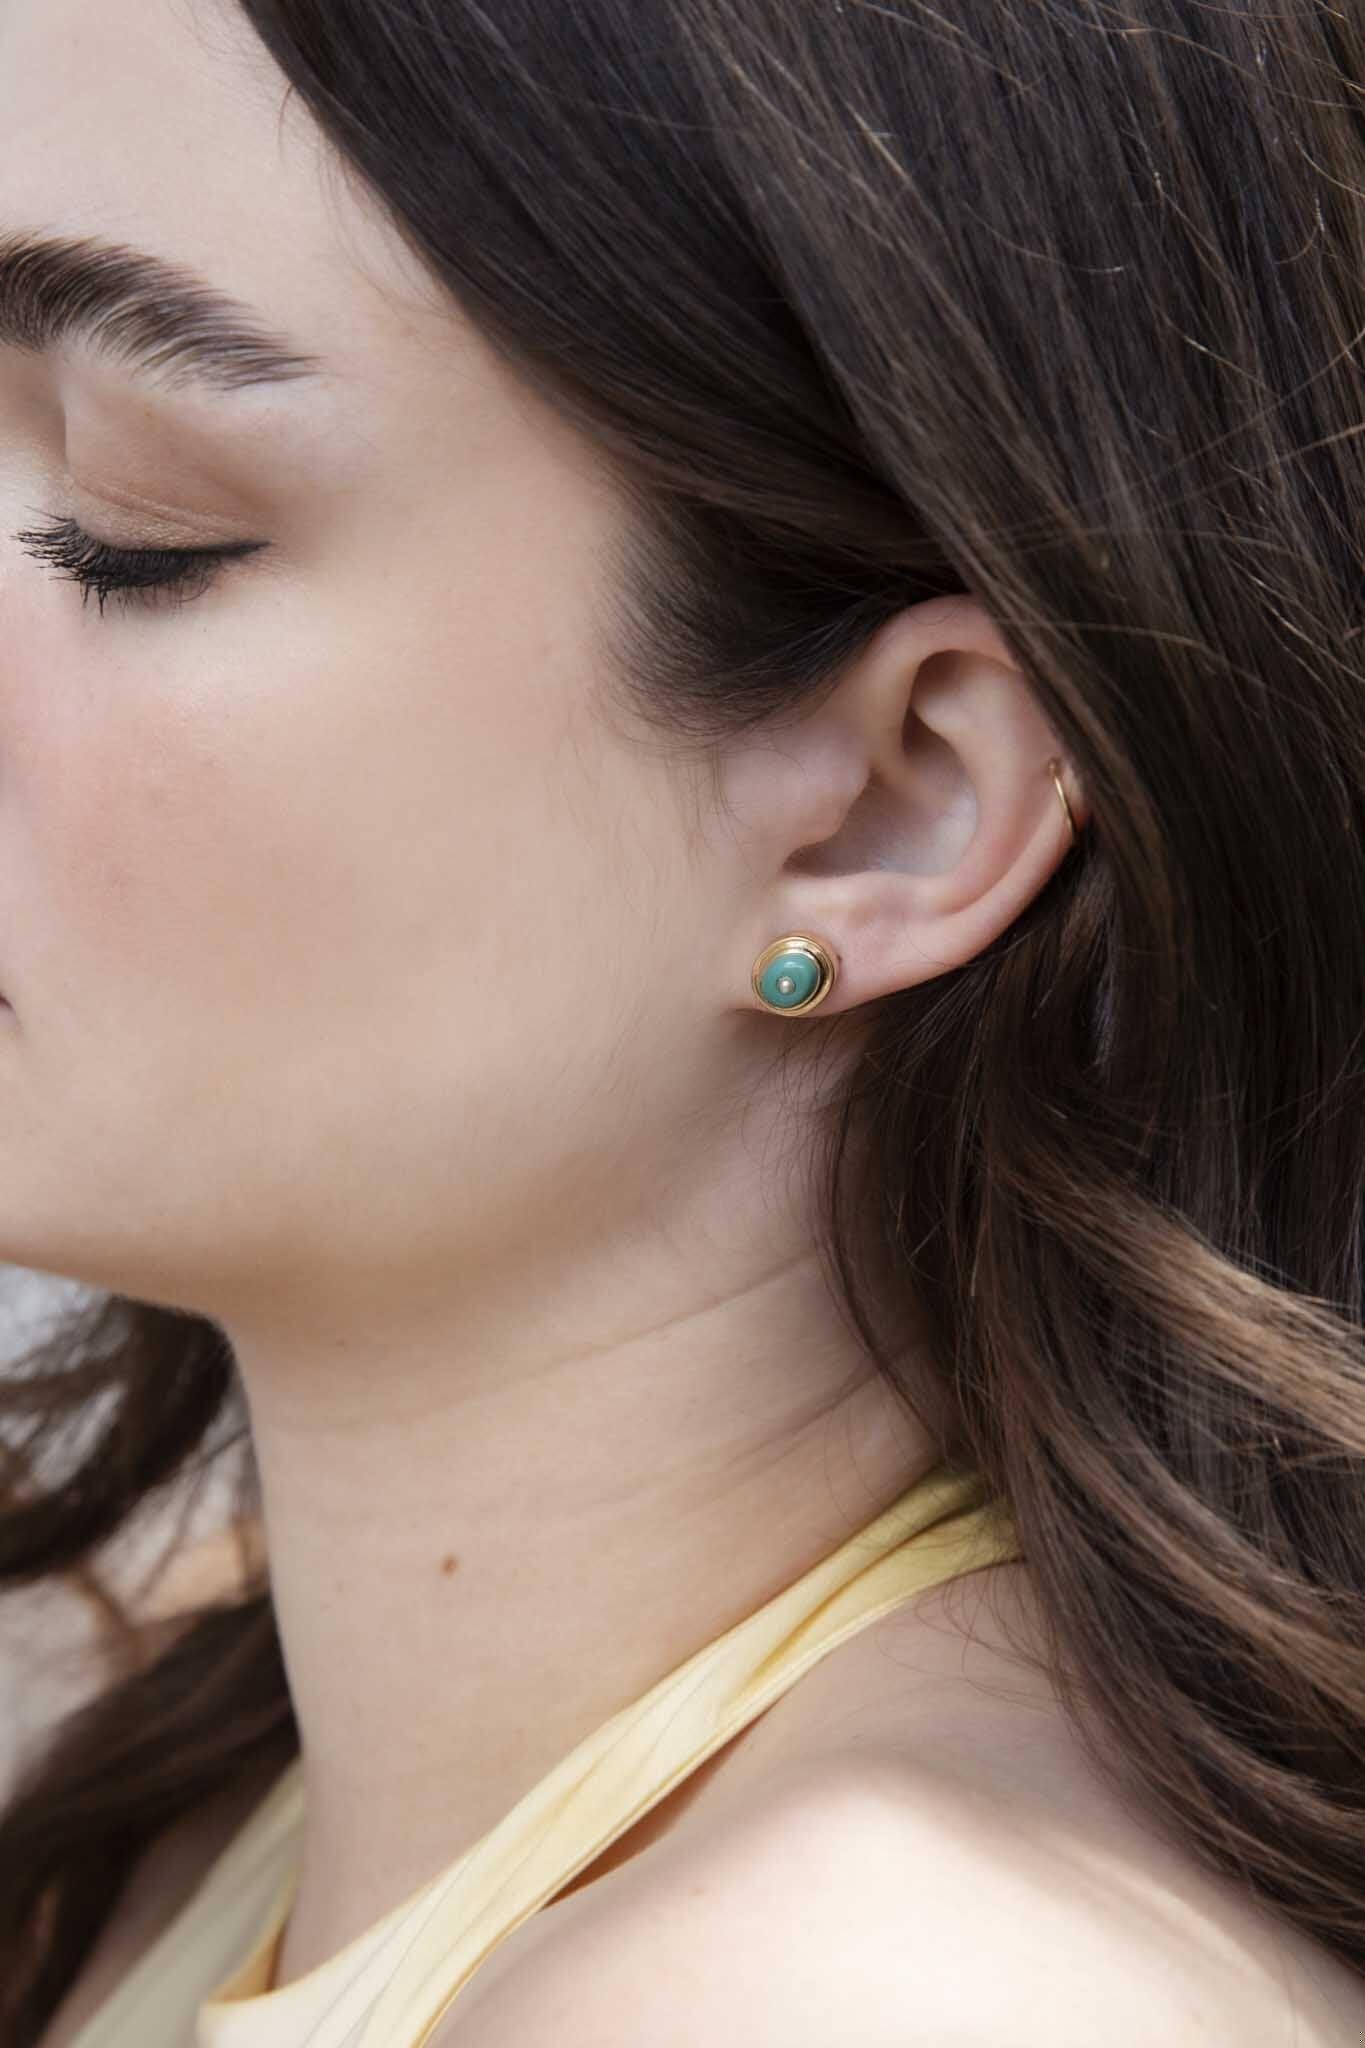 The Gina Earrings are a subtle blend of creamy turquoise and seed pearls framed in ribbons of gold. Worn when the curtain falls and the madding crowd of the theatre has scattered into the night, she is for you and yours.

The Gina Earrings Gem